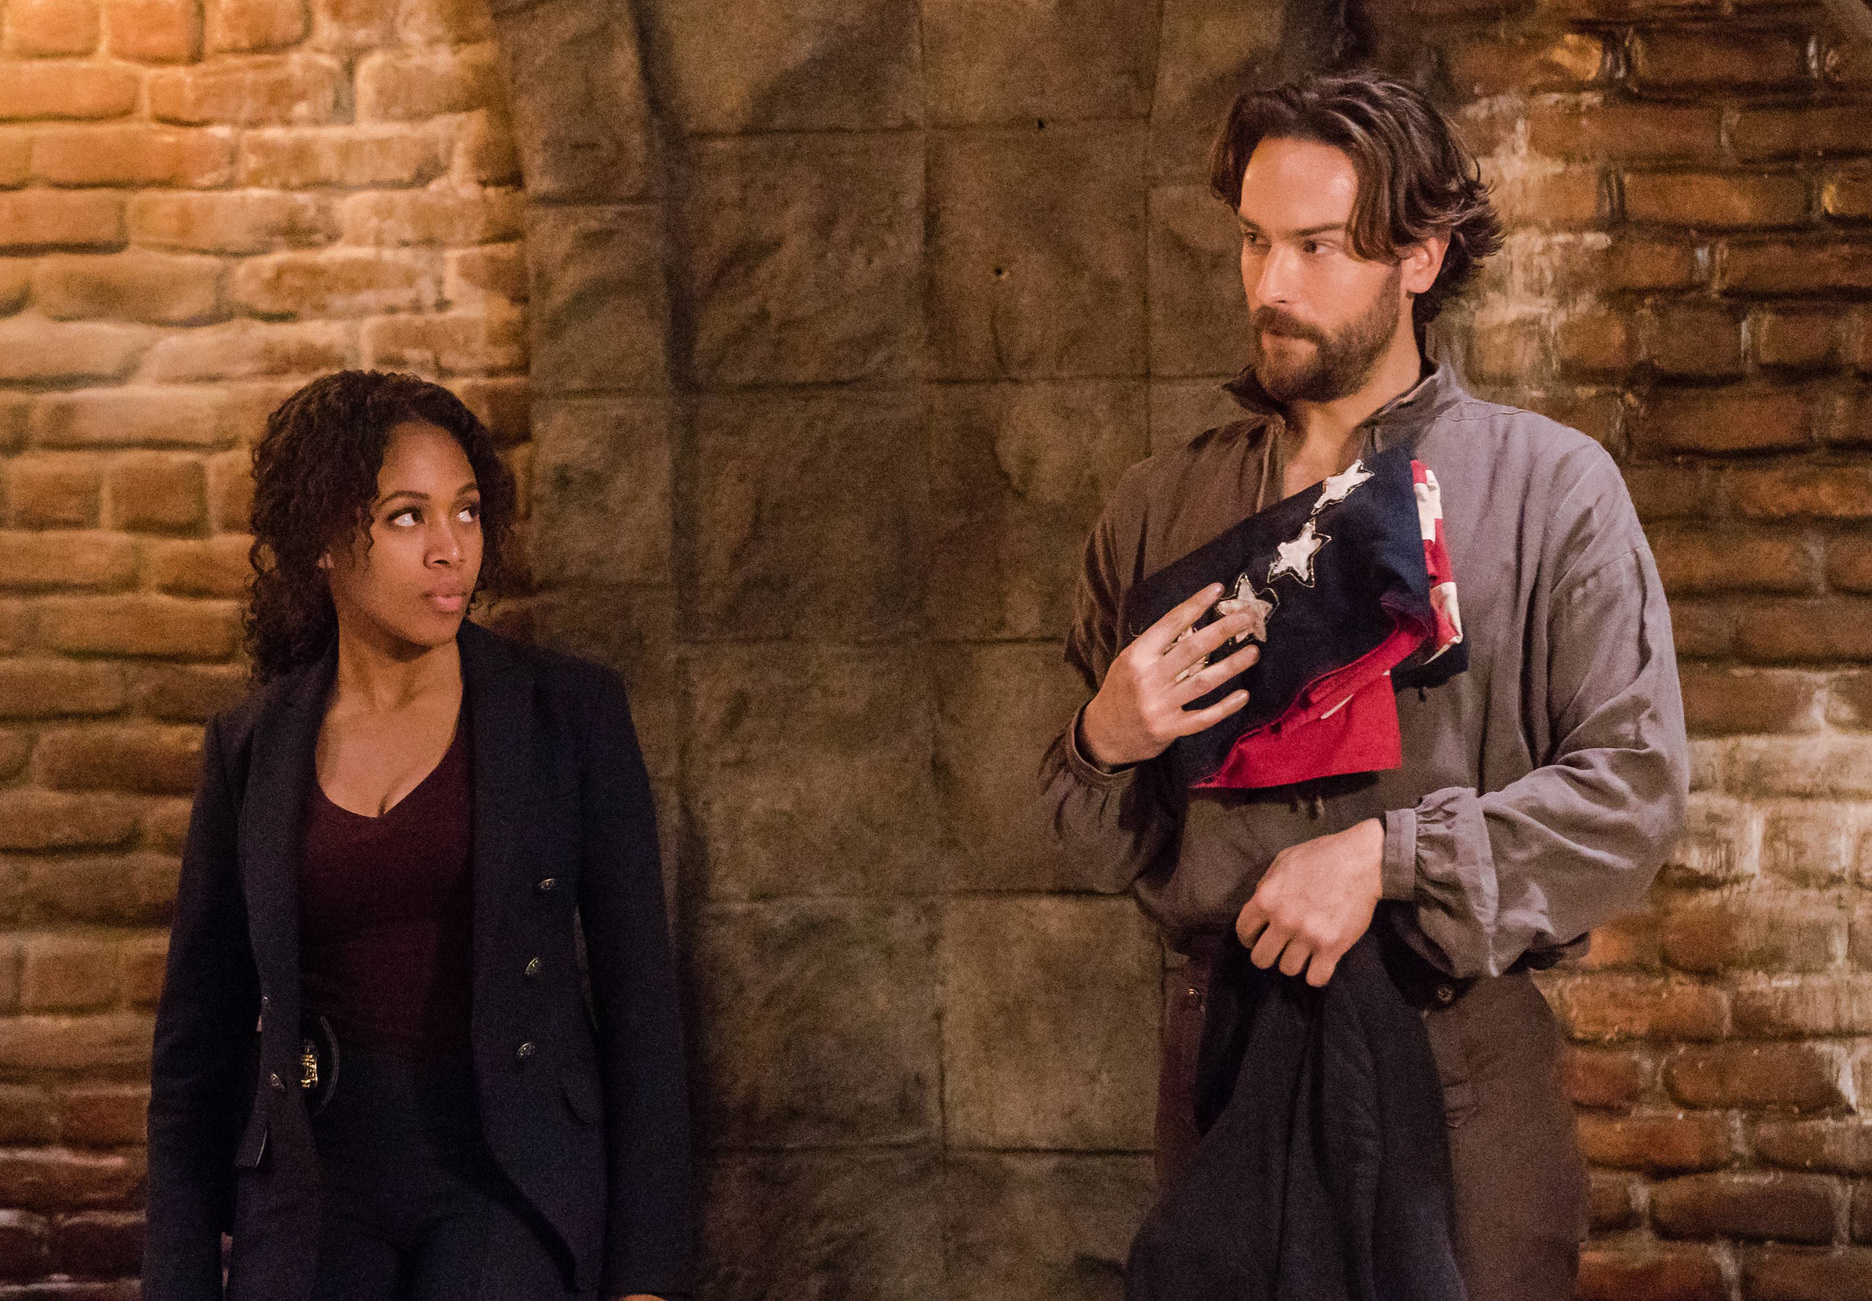 SLEEPY HOLLOW: L-R: Nicole Beharie and Tom Mison in the "Dawn’s Early Light" episode of SLEEPY HOLLOW airing Friday, March 25 (8:00-9:00 PM ET/PT) on FOX. ©2016 Fox Broadcasting Co. Cr: Tina Rowden/FOX